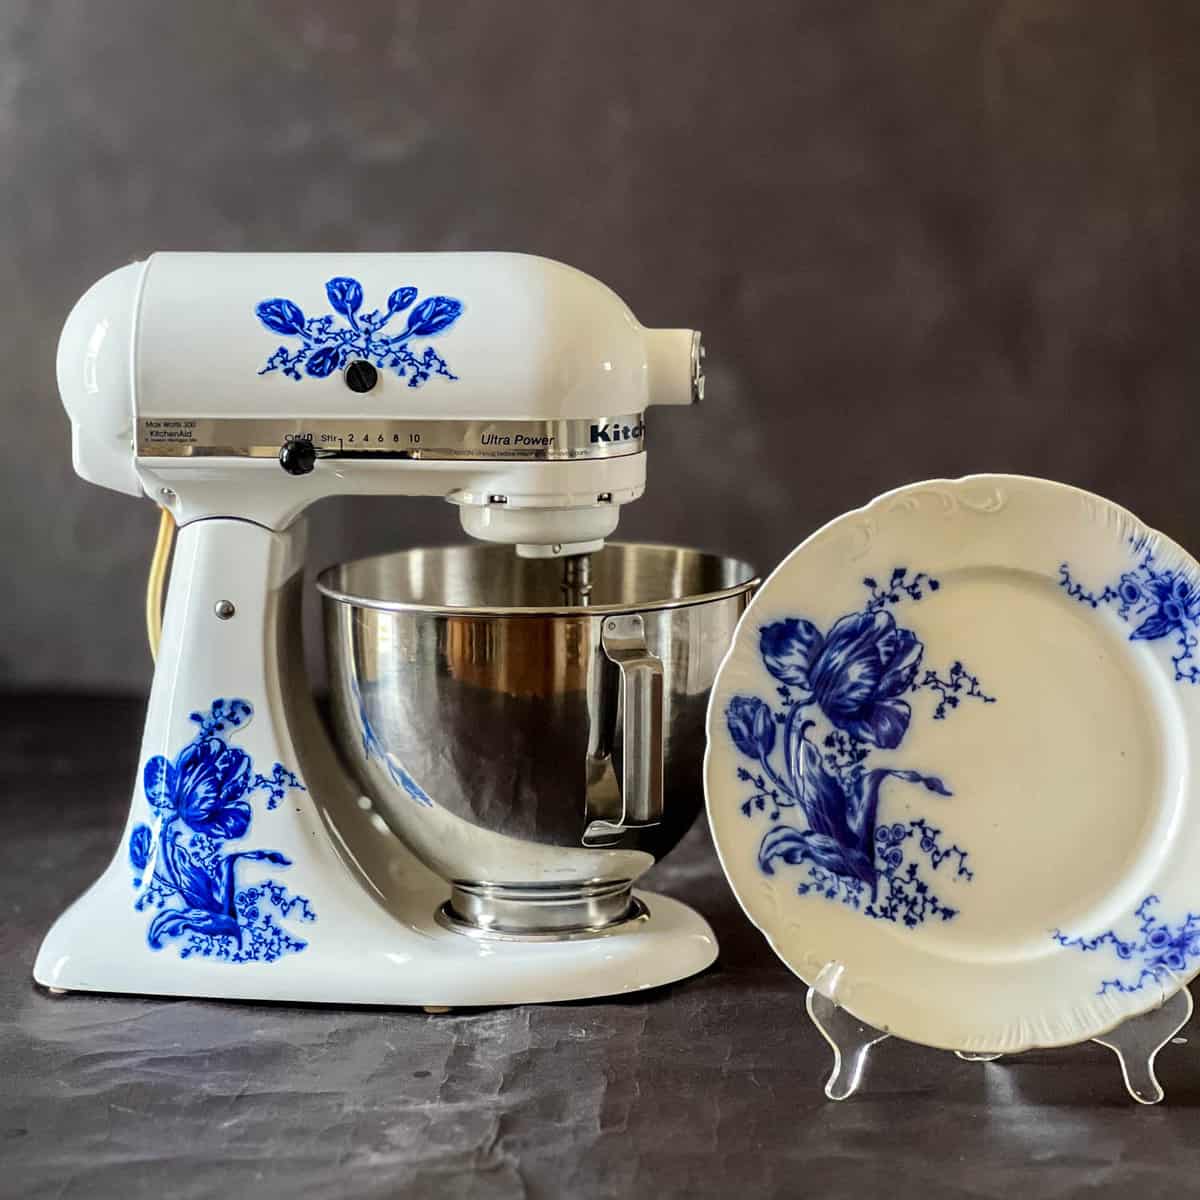 Kitchen aid with a blue tulip decal beside a flow blue plate the same  blue tulip.